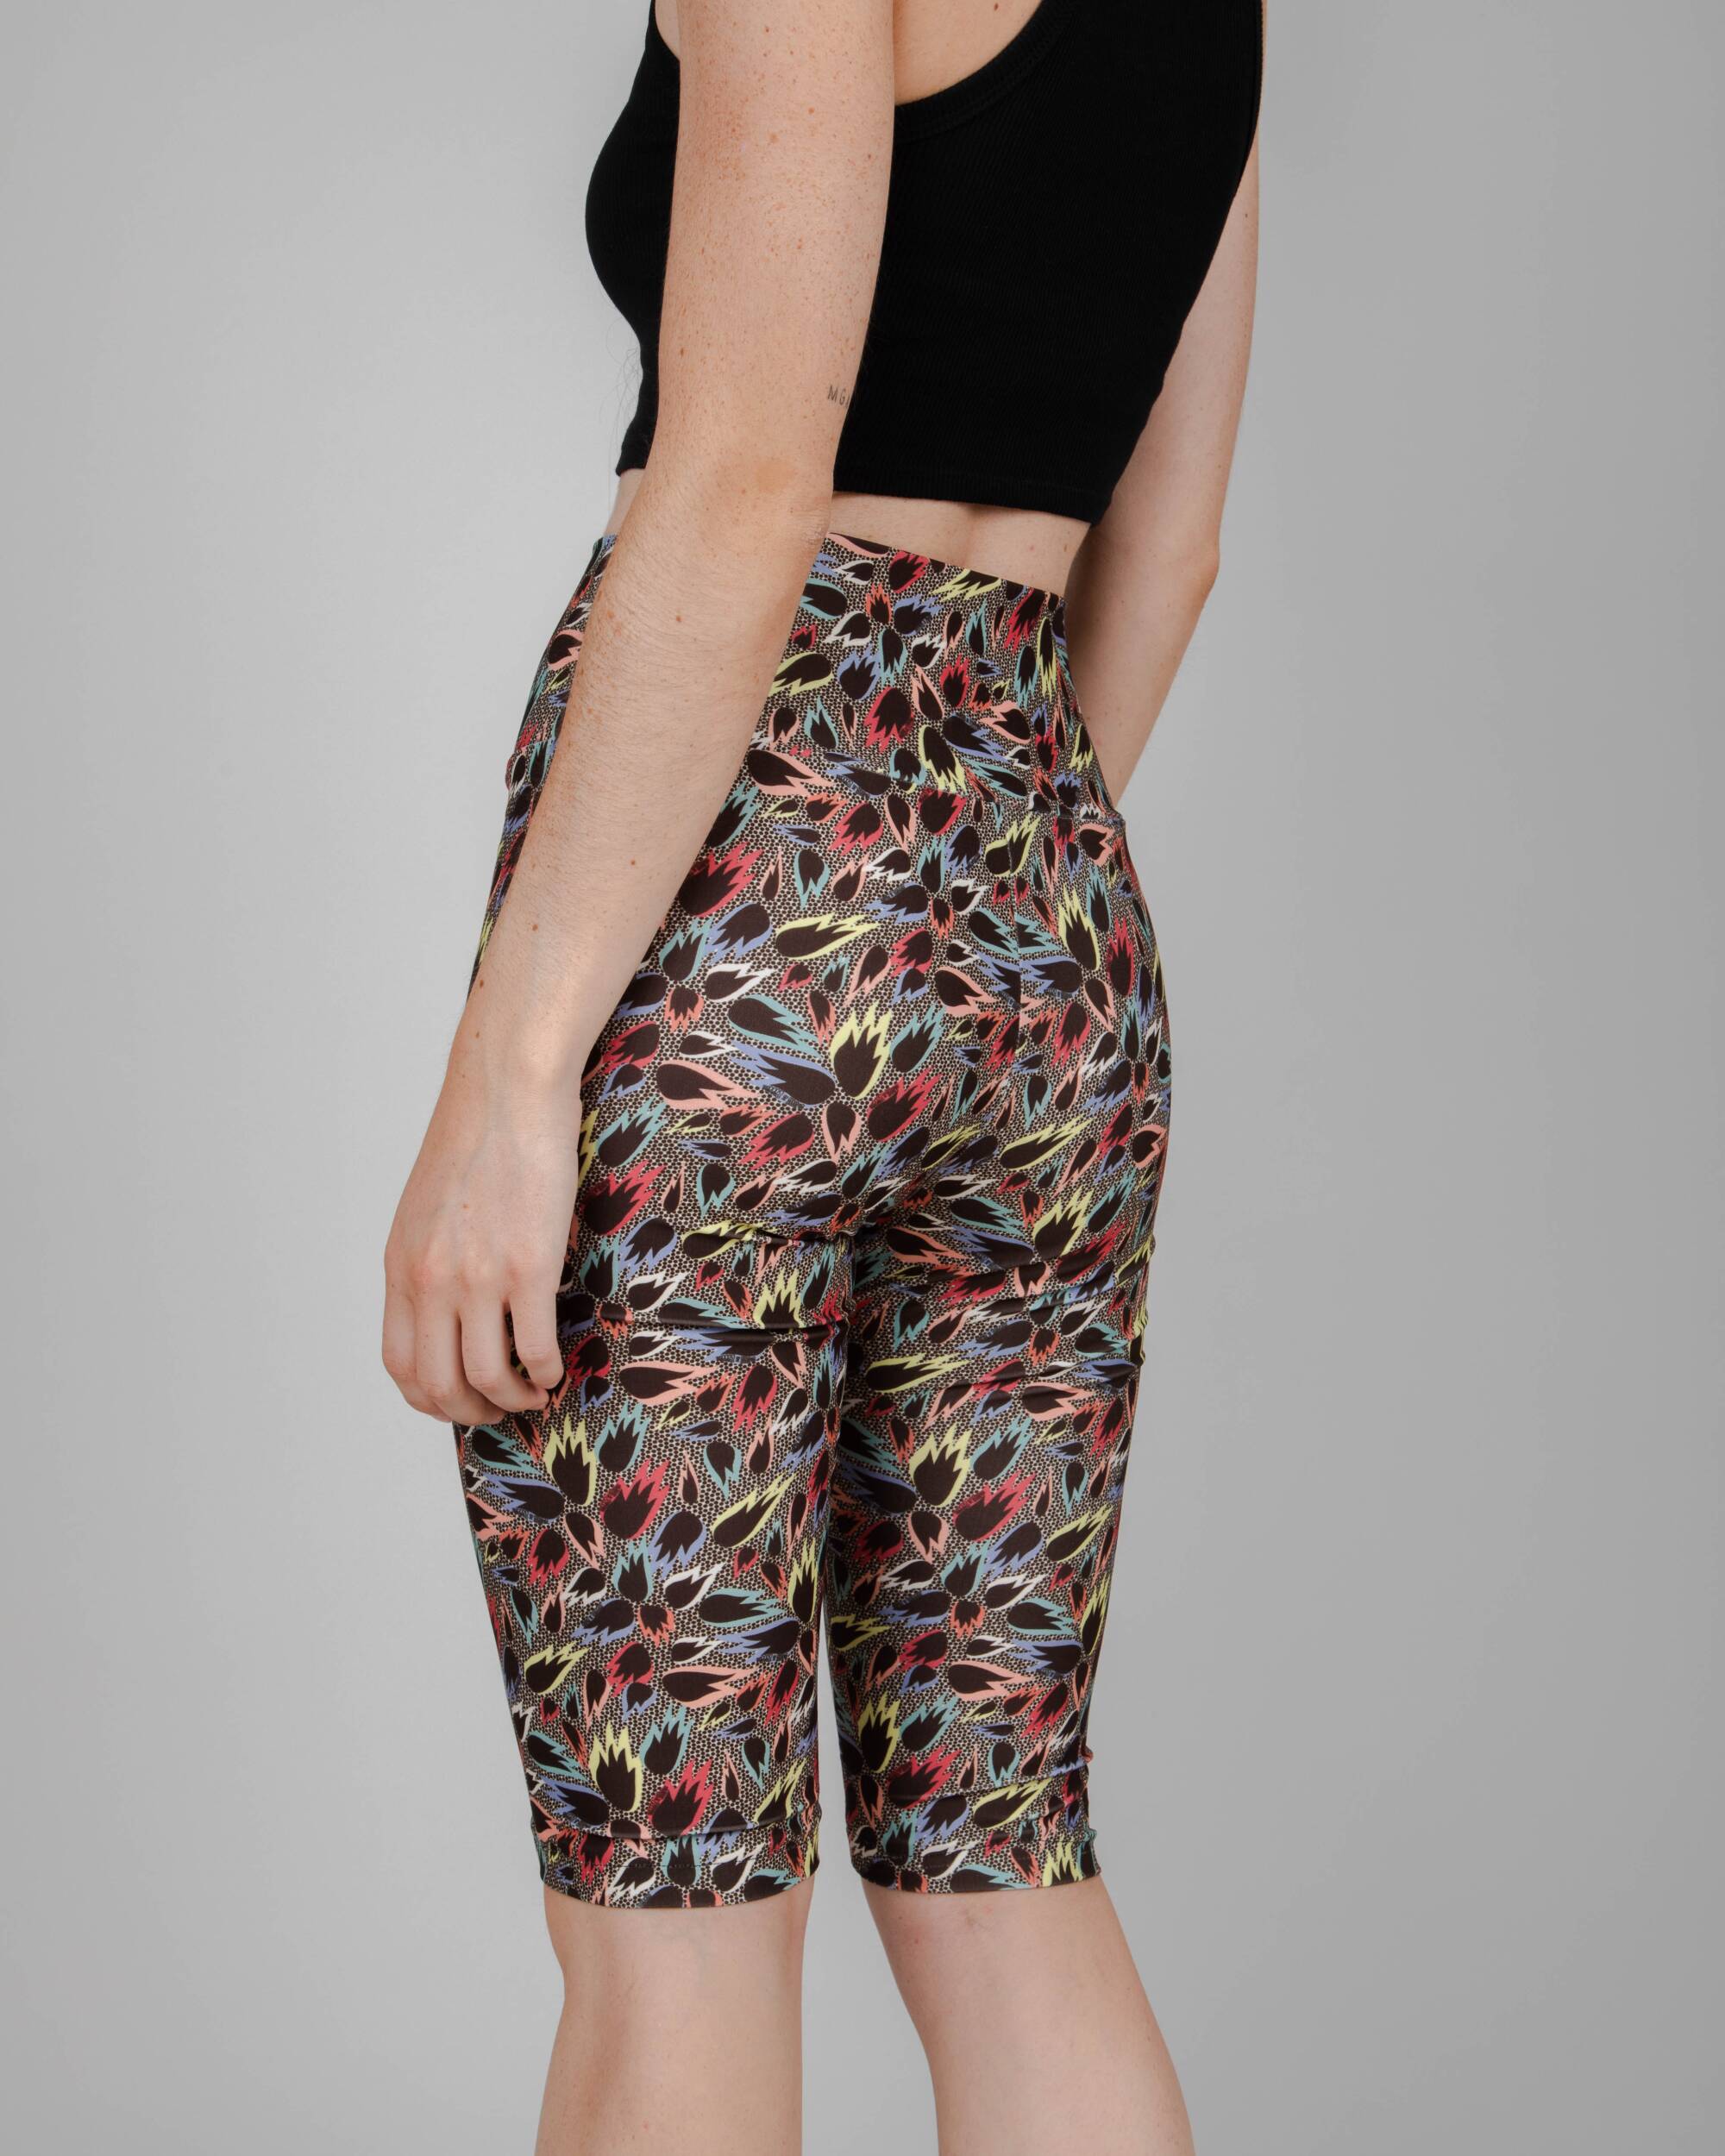 Colorful leggings Peseta Flames 3/4 made from recycled polyester and recycled elastane from Brava Fabrics